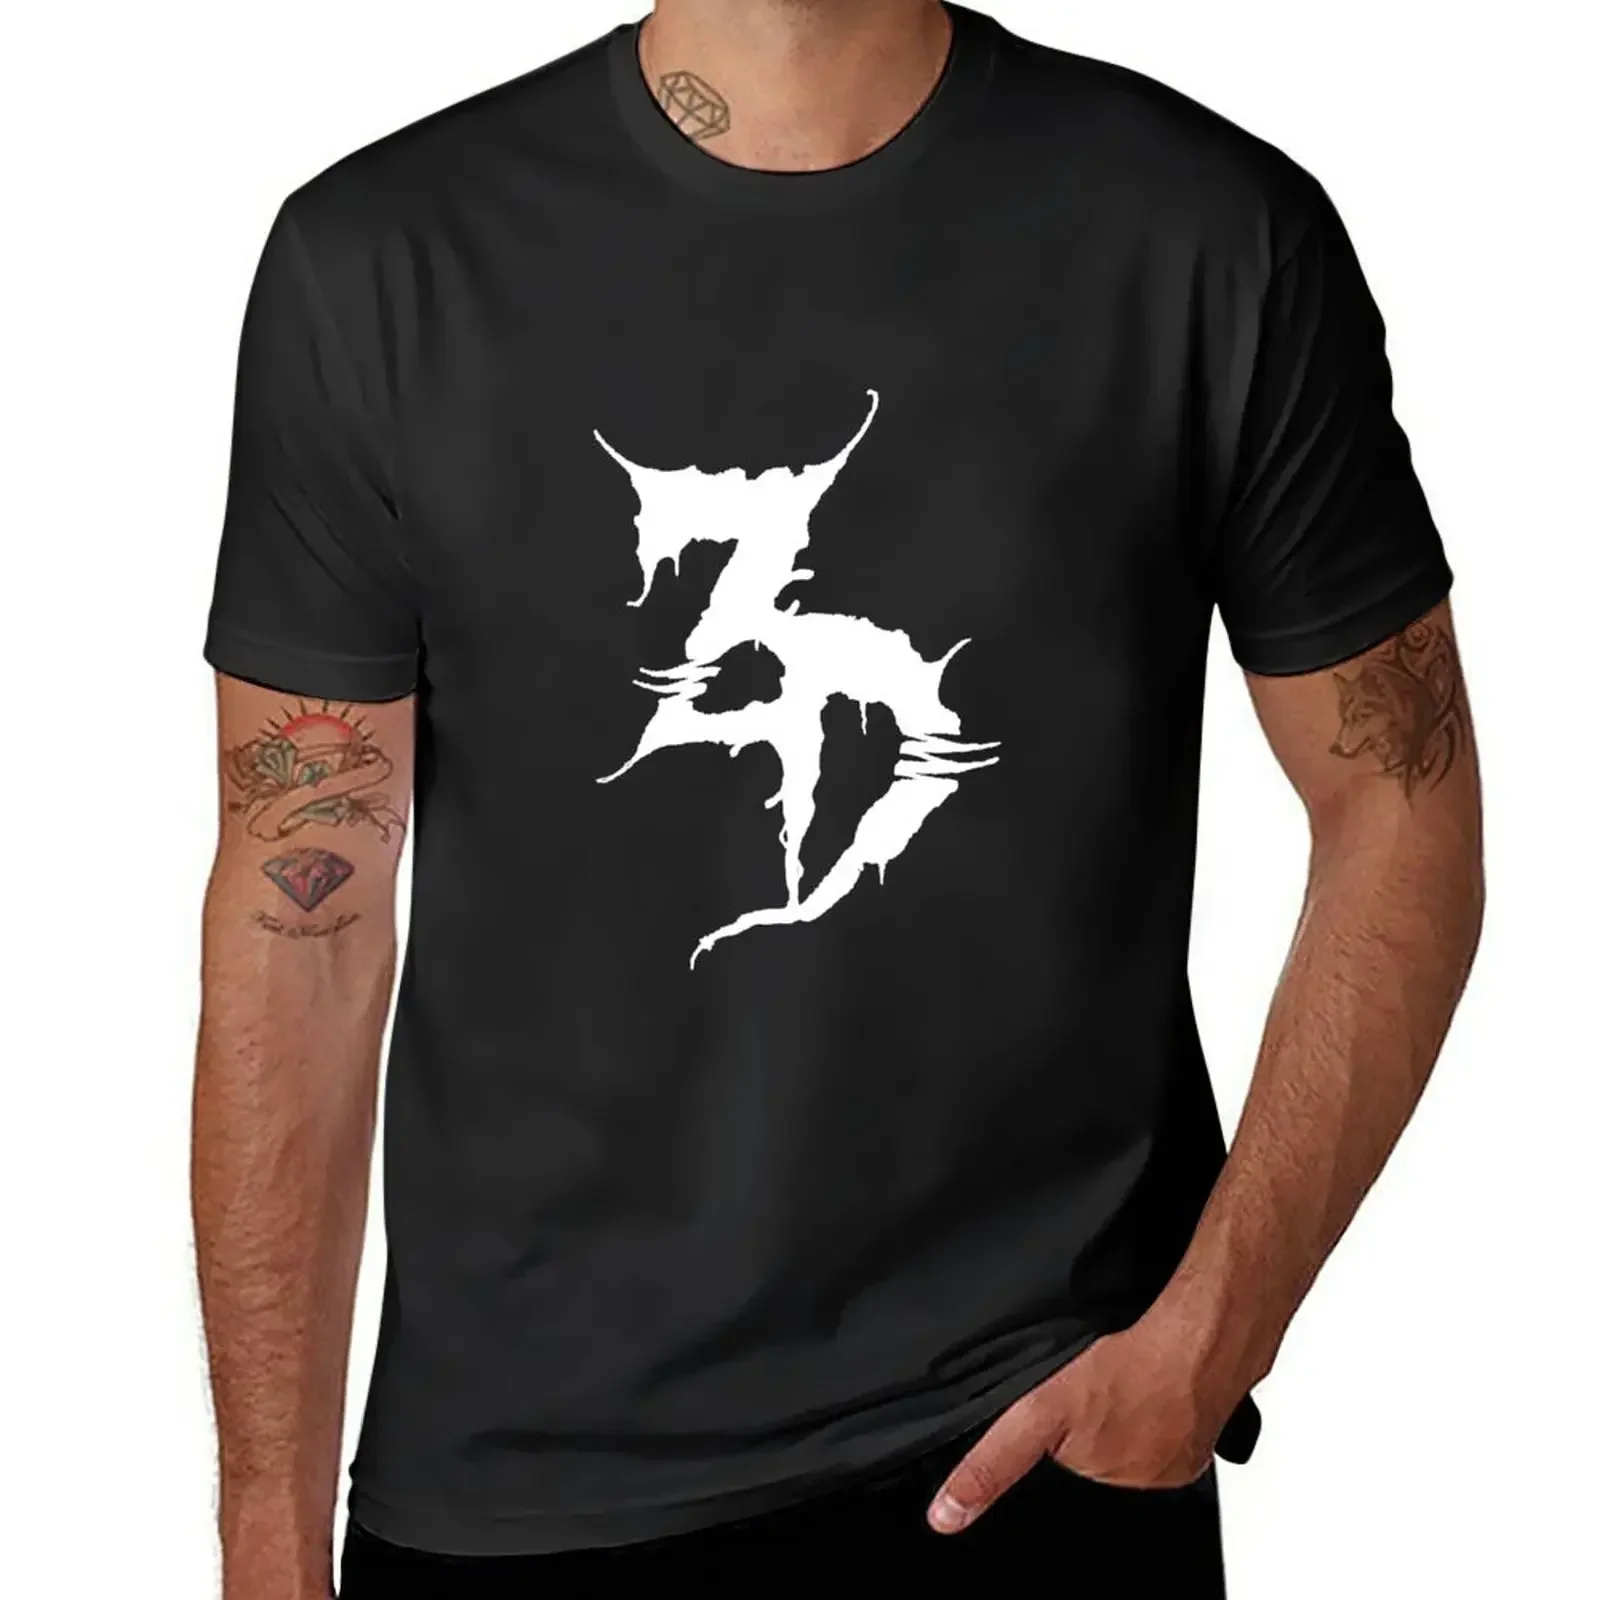 

Zeds Dead T-Shirt shirts graphic tees aesthetic clothes mens t shirts